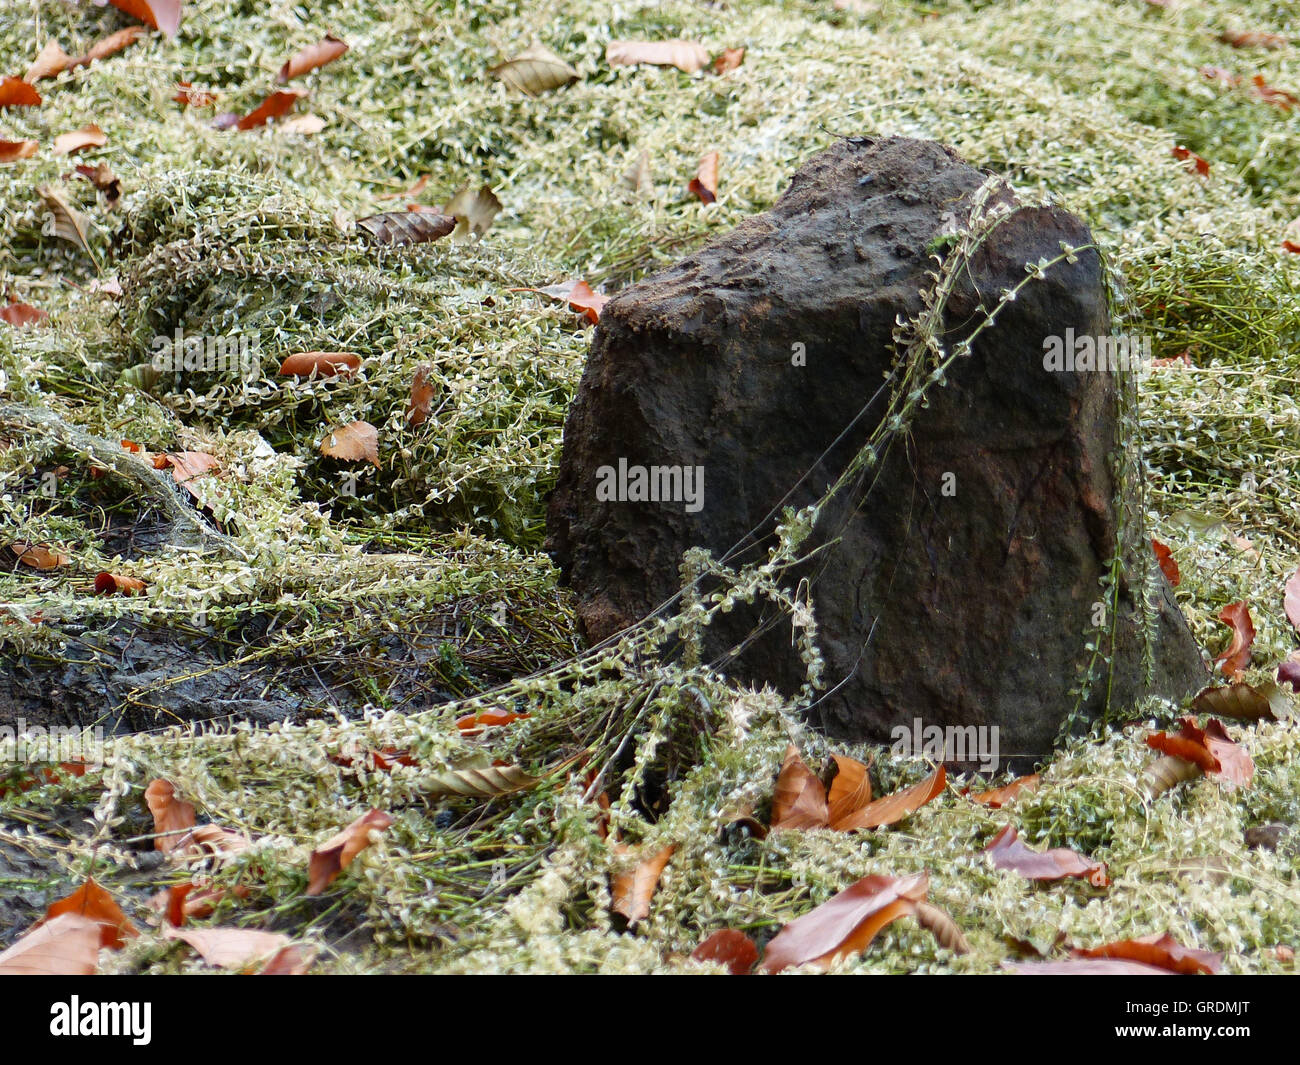 This Natural Beauty Is Otherwise Hidden. Algae, Autumn Leaves And A Stone In The Discharged Eiswoog Near Ramsen, So To Speak At The Bottom Of The Dry Lake Stock Photo